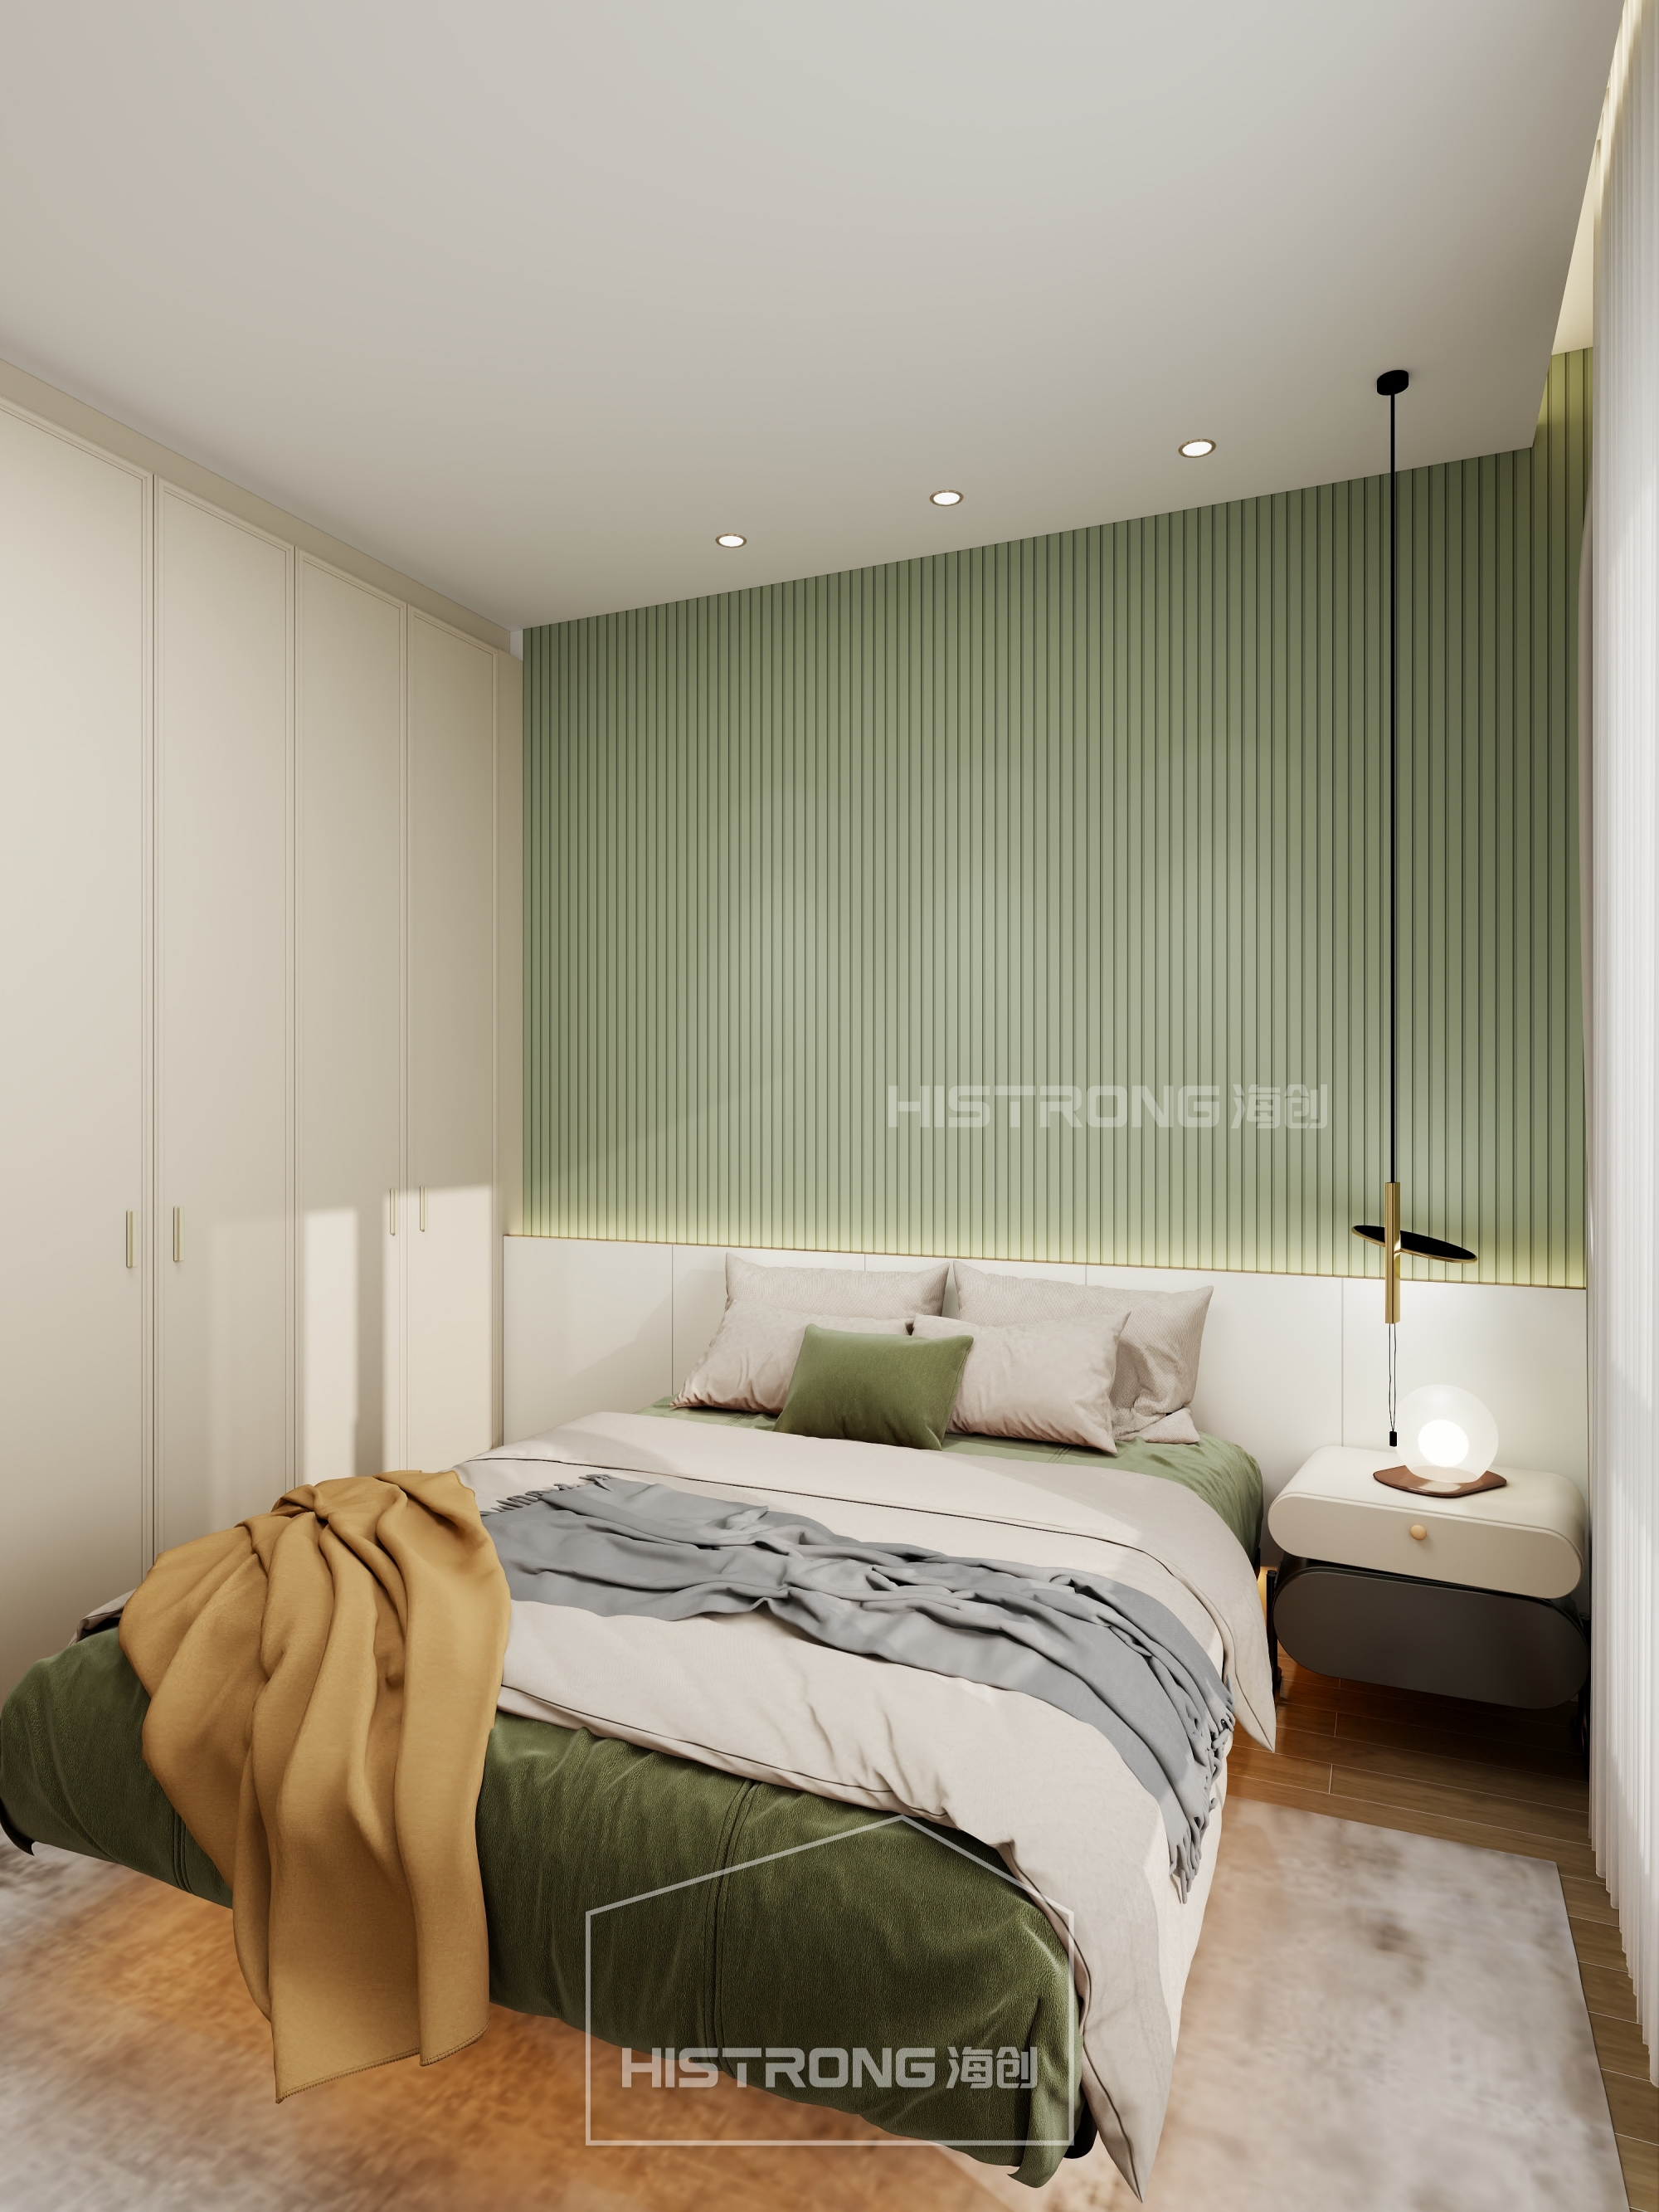 HISTRONG Malaysia No #1 Eco Wall Panel, Best Feature Wall in Malaysia.